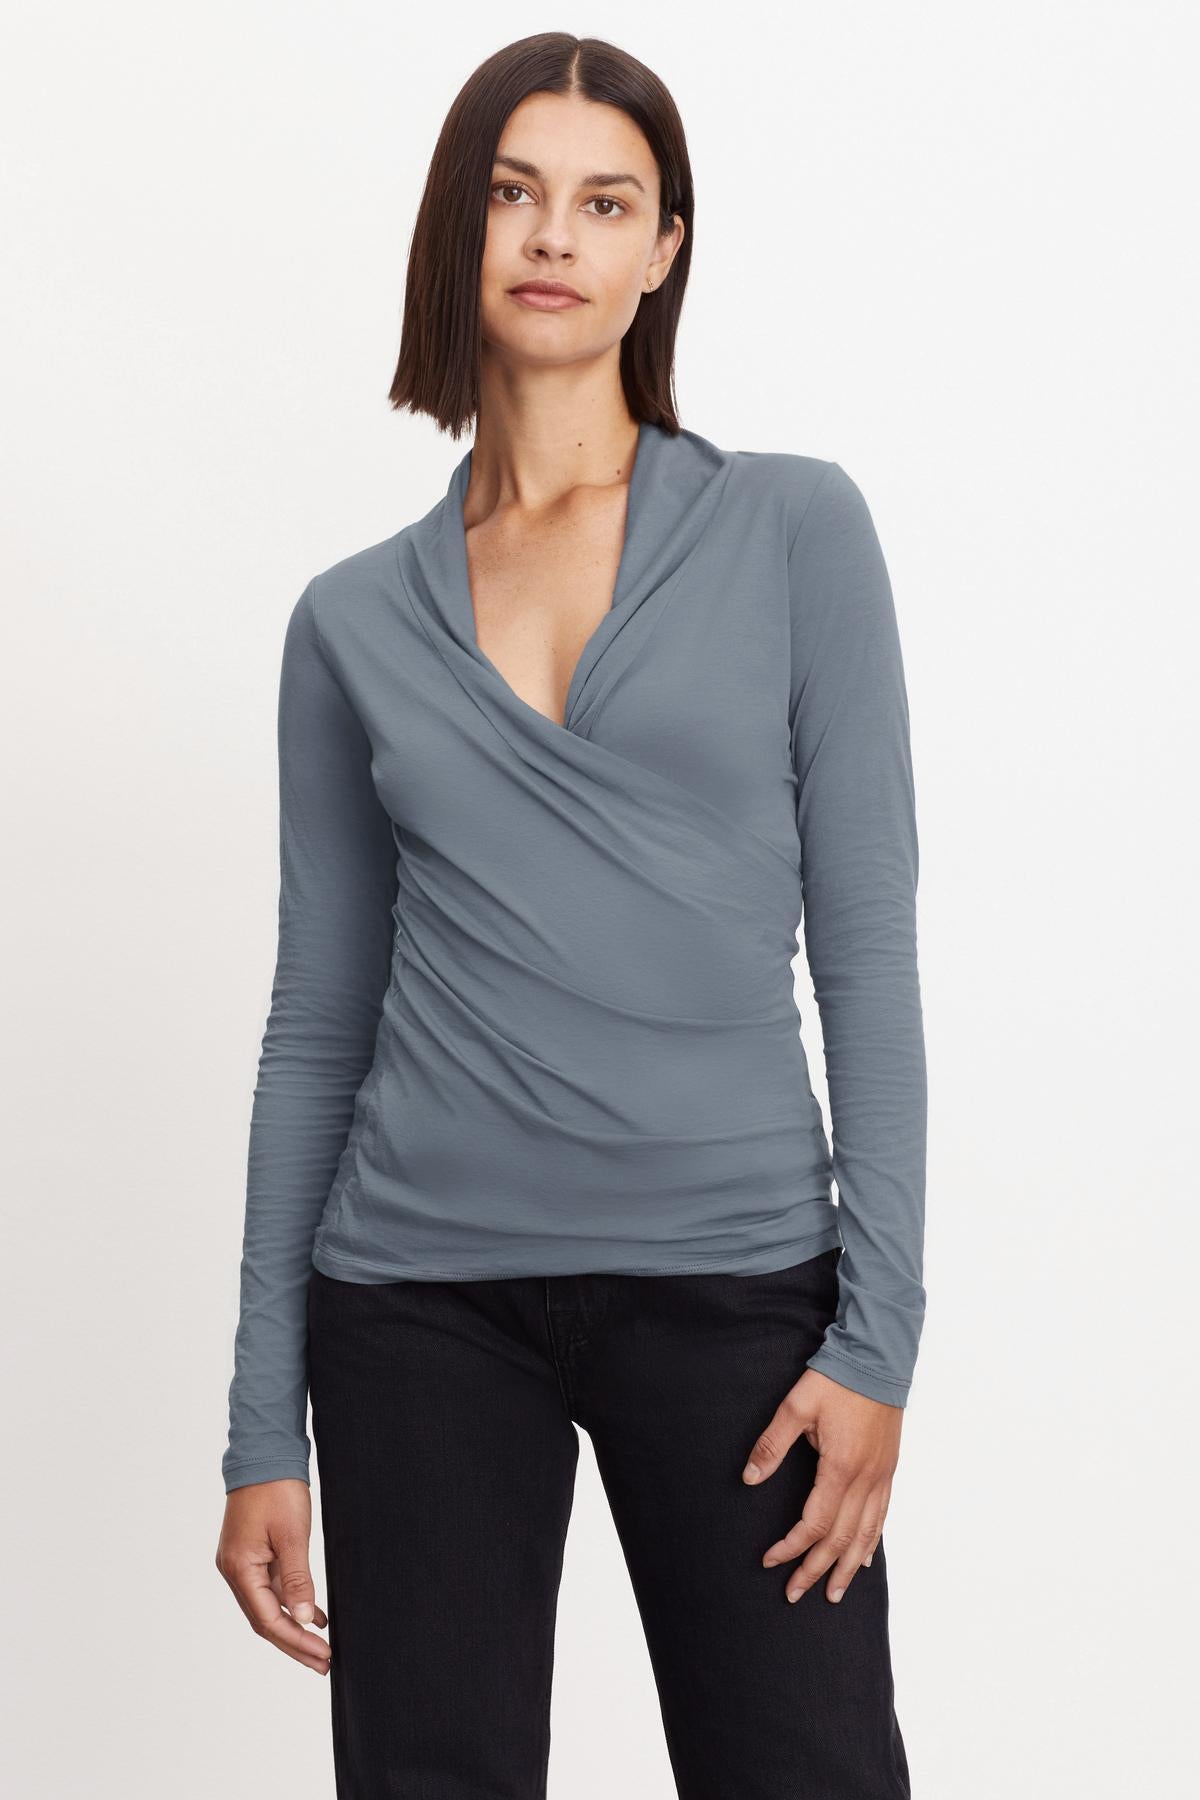   The model is wearing a Velvet by Graham & Spencer MERI WRAP FRONT FITTED TOP gray long-sleeved top with cross-over v-neck. 